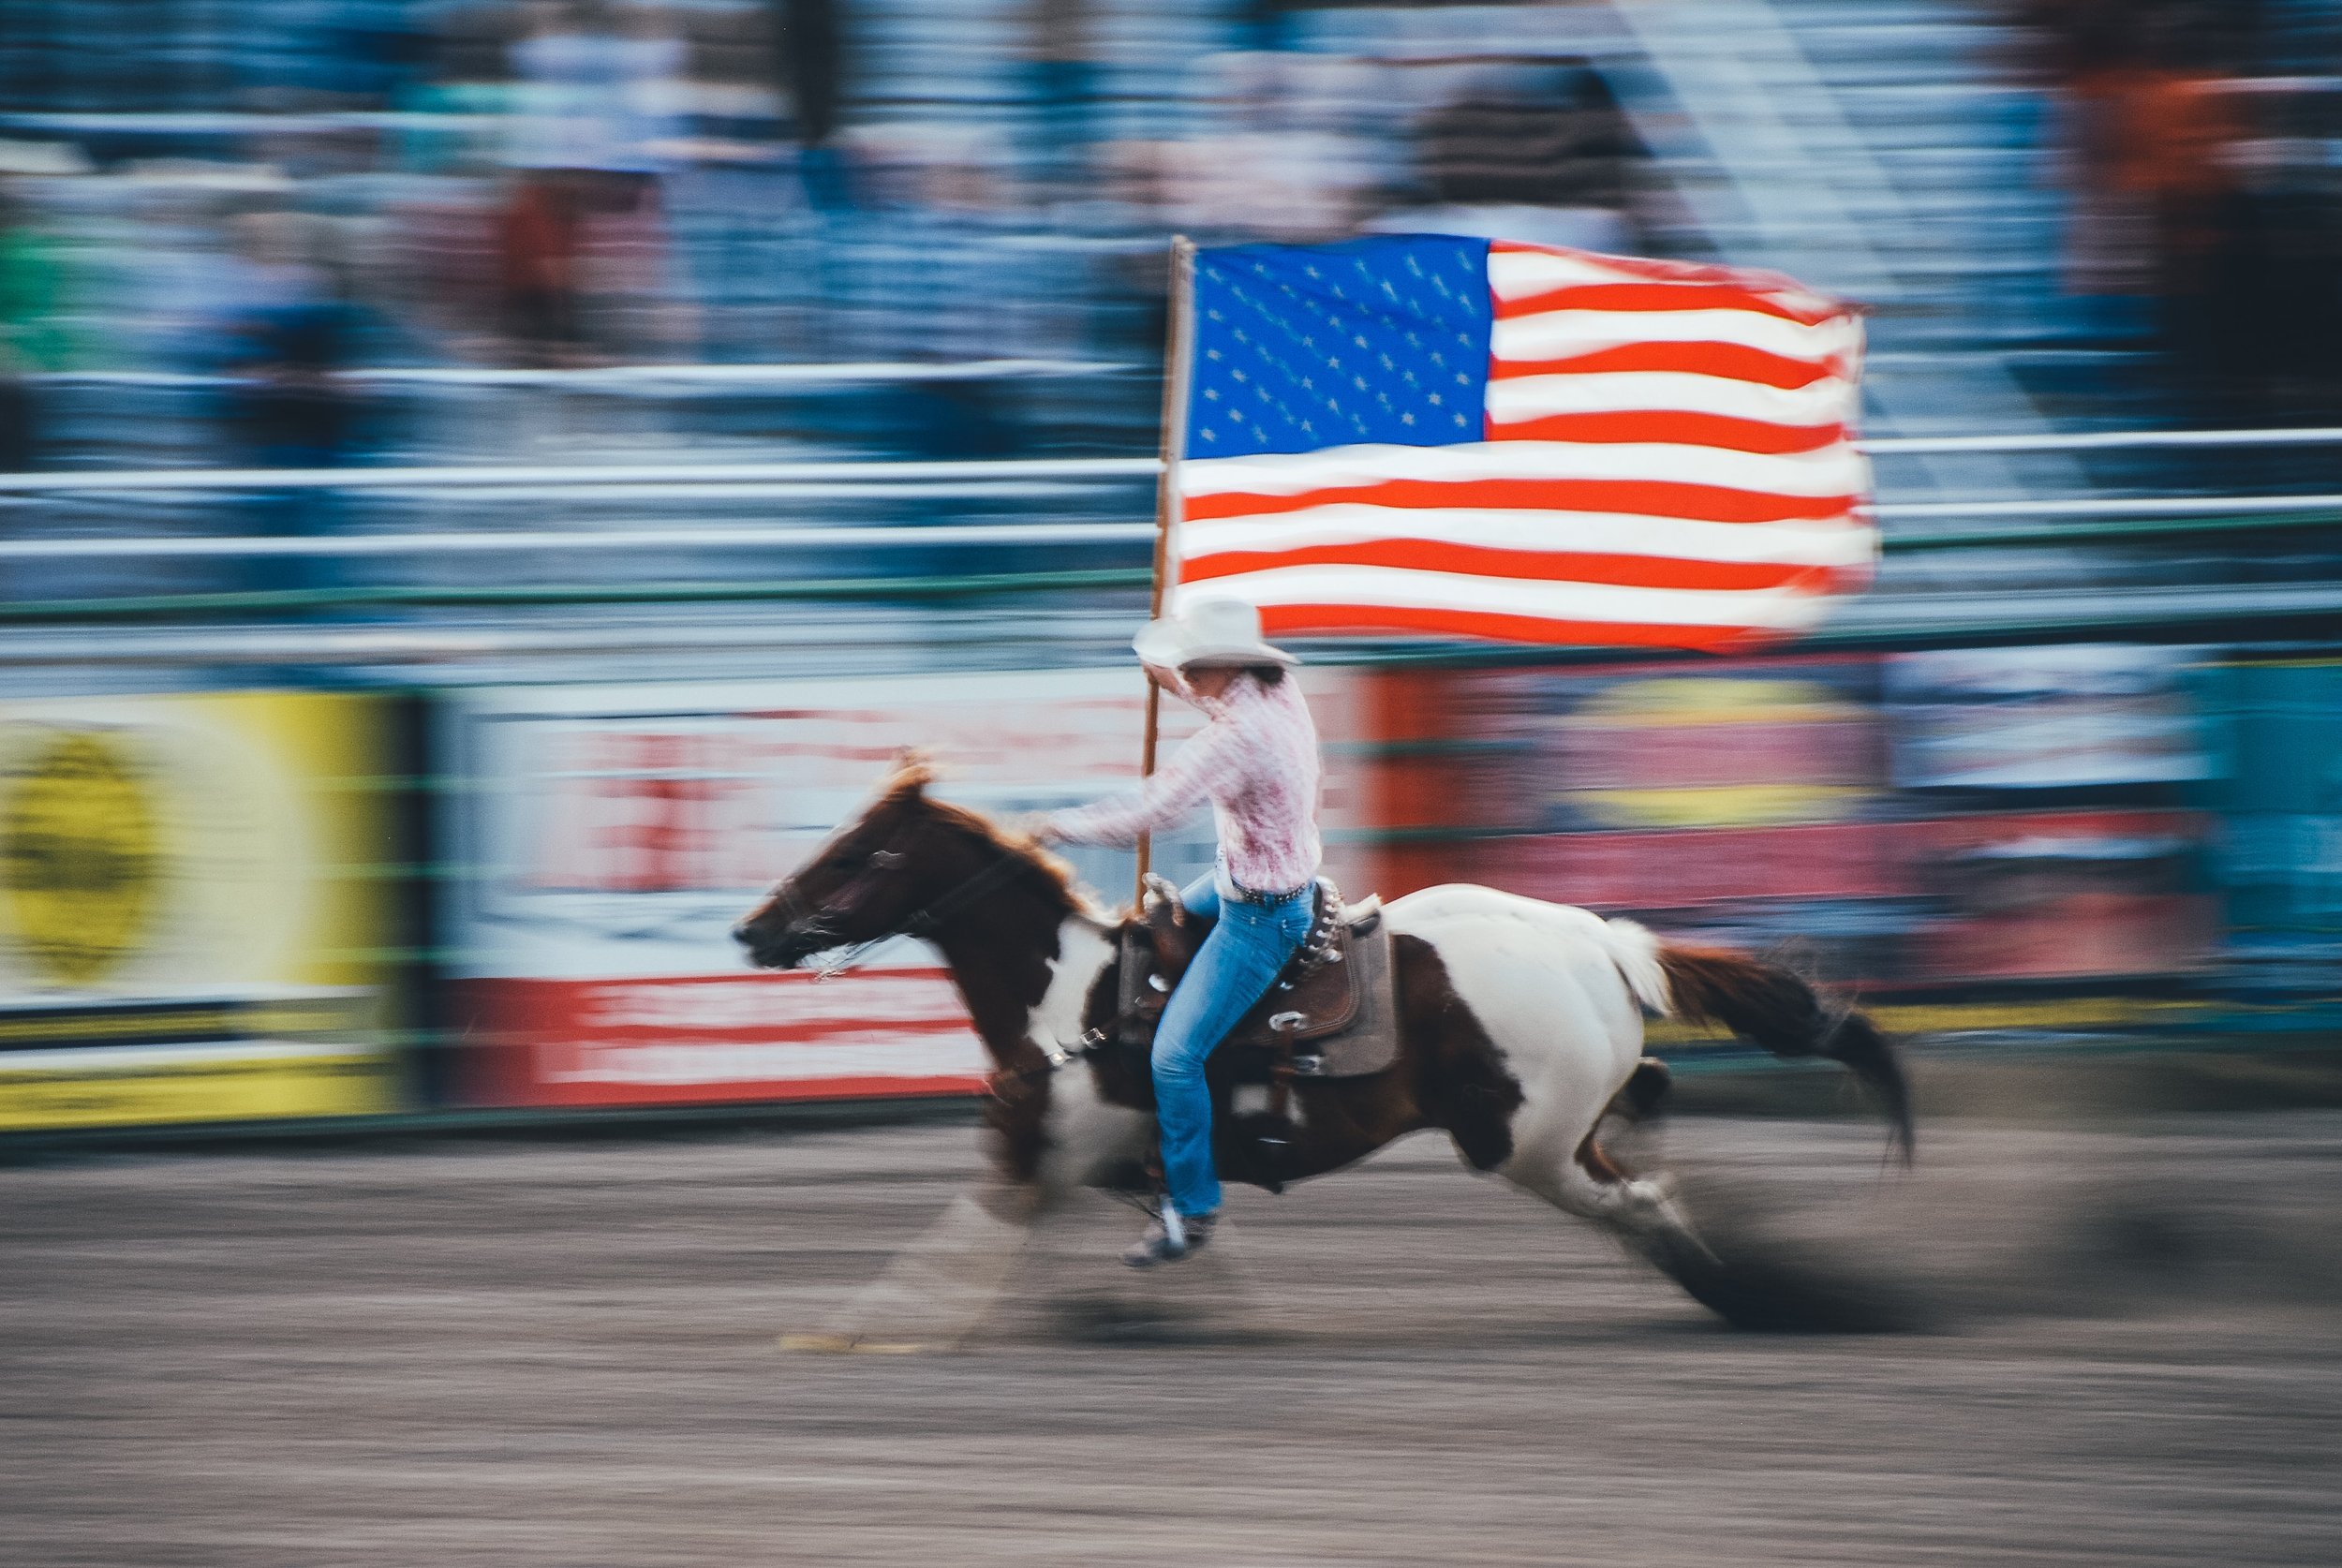 Woman riding a horse carrying a flag